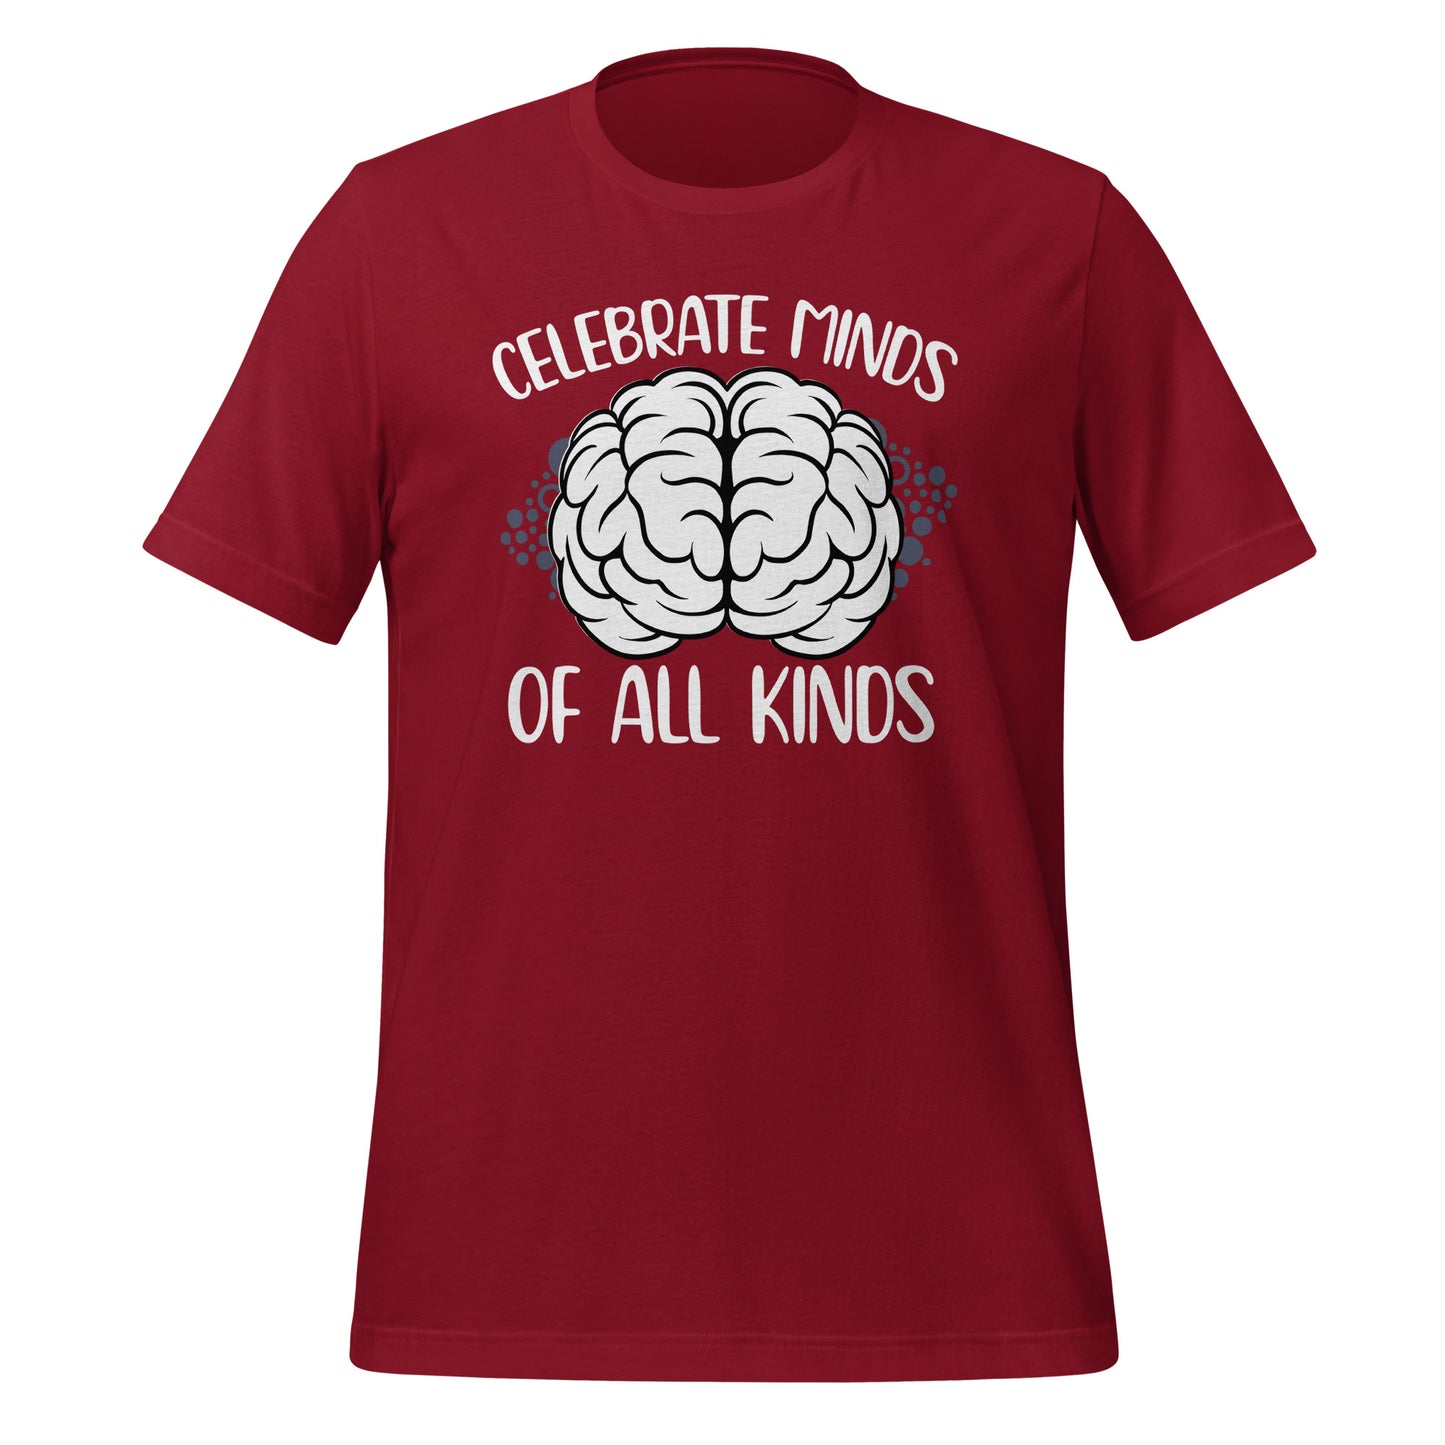 Celebrate Minds of All Kinds Quality Cotton Bella Canvas Adult T-Shirt